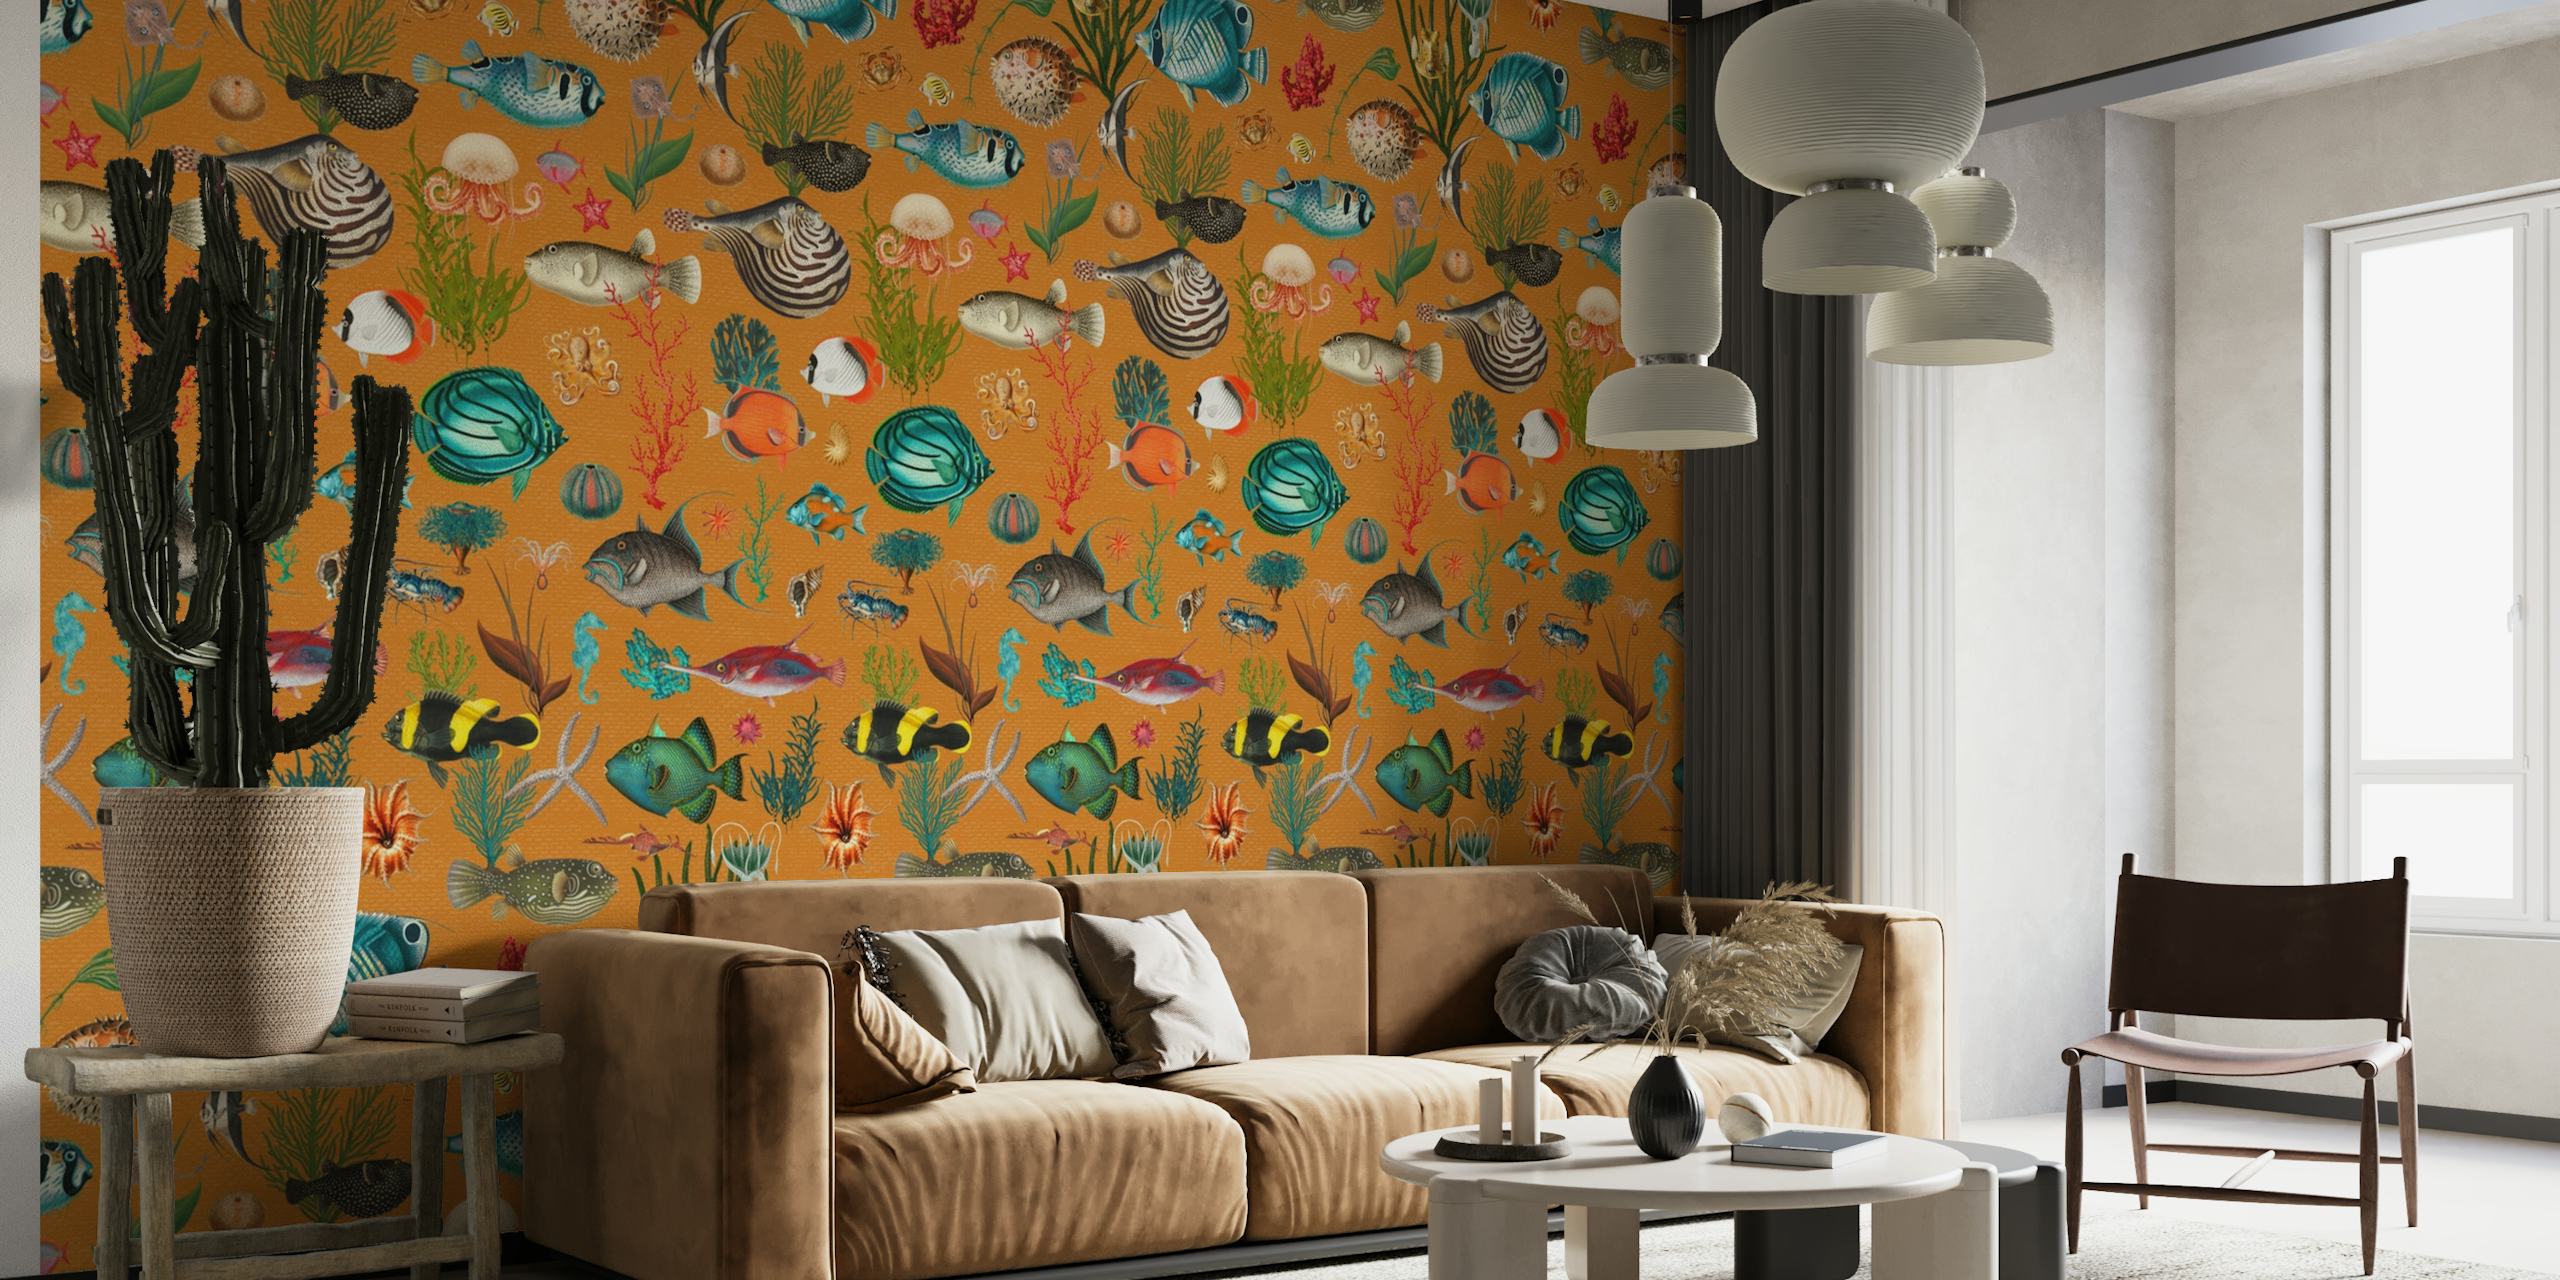 Oceania in orange wall mural with tropical fish and sea life